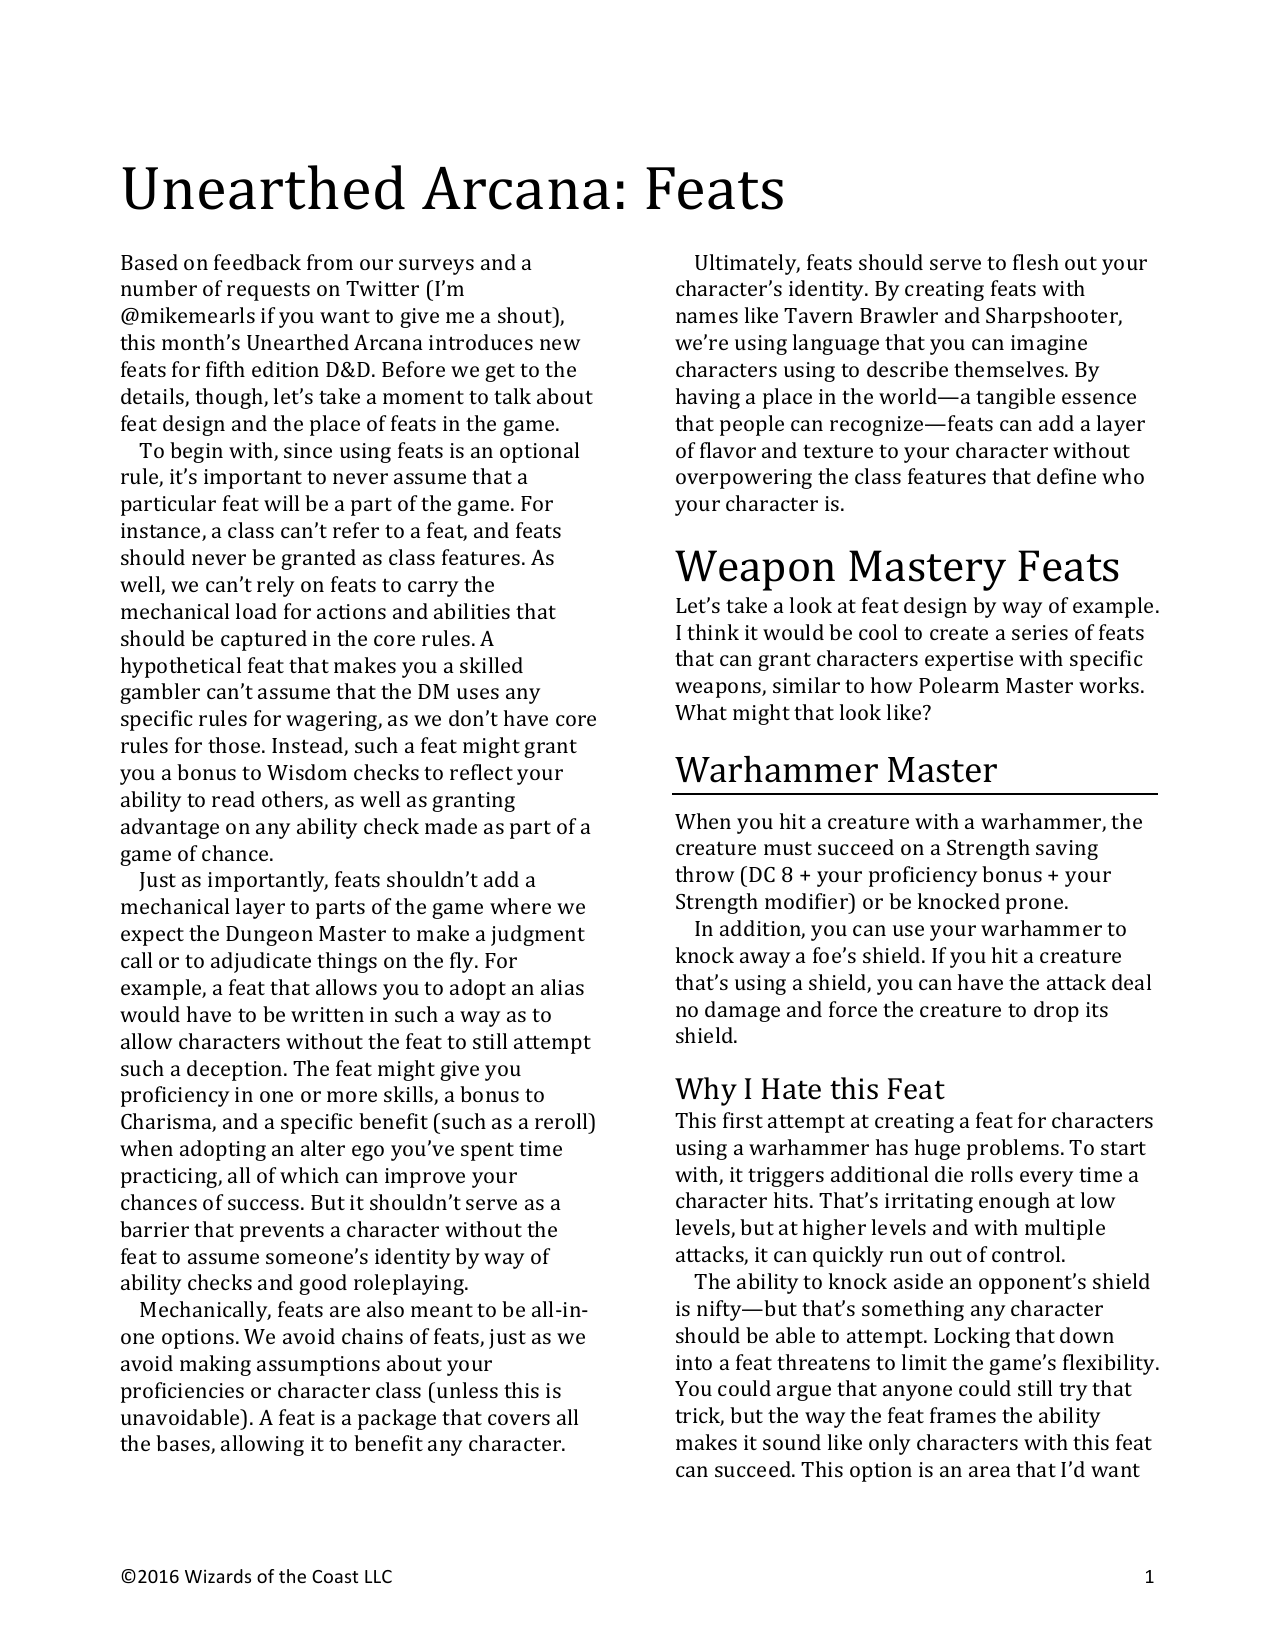 Next Unearthed Arcana